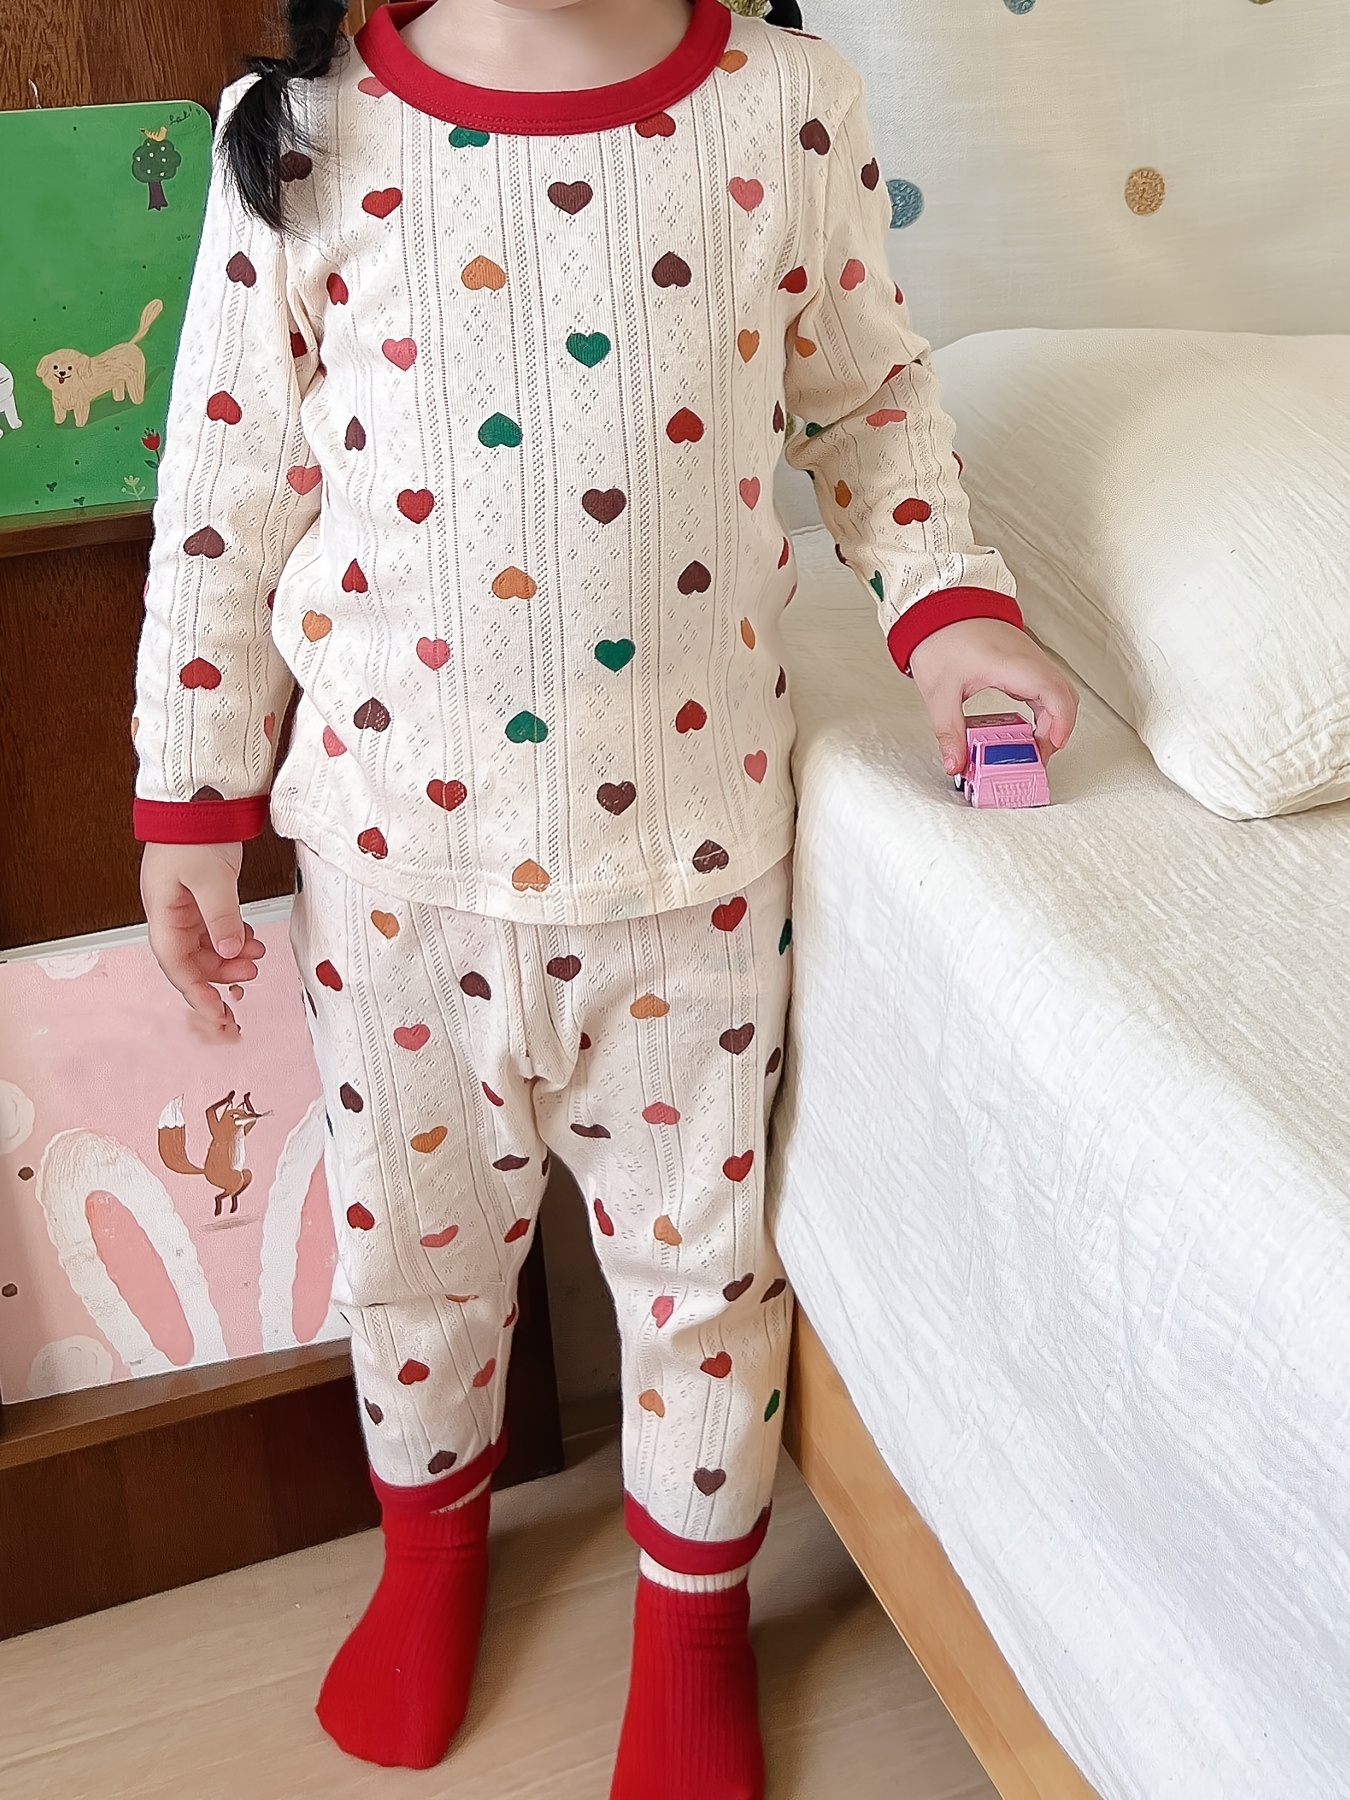 How to Choose the Best Pajamas for Kids of All Ages - Pajamas for